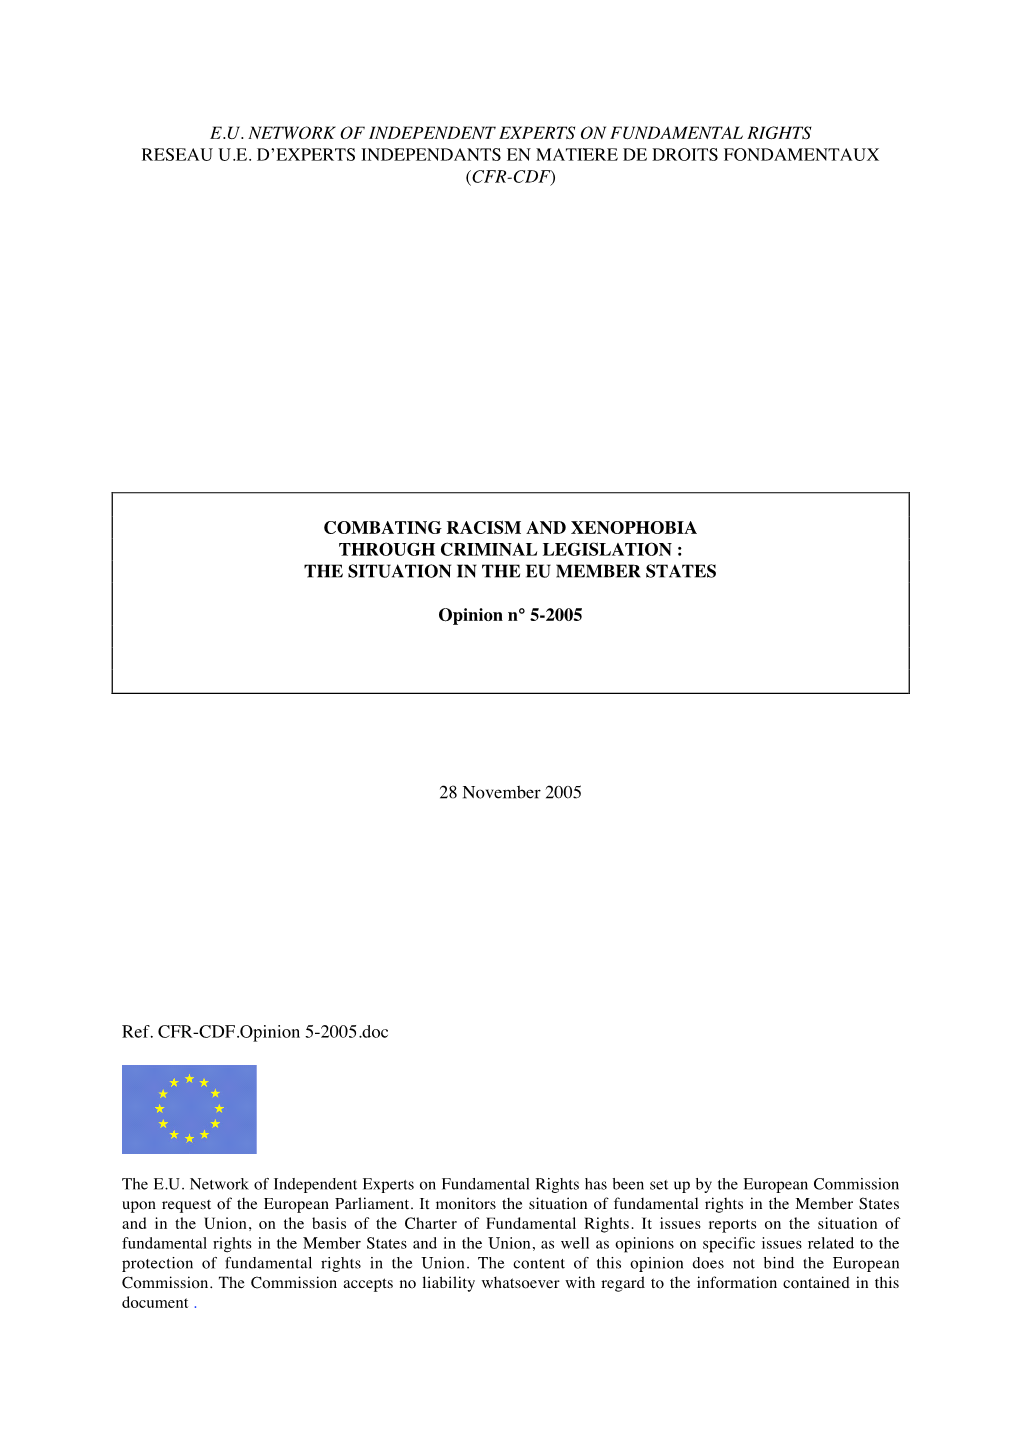 Combating Racism and Xenophobia Through Criminal Legislation : the Situation in the Eu Member States